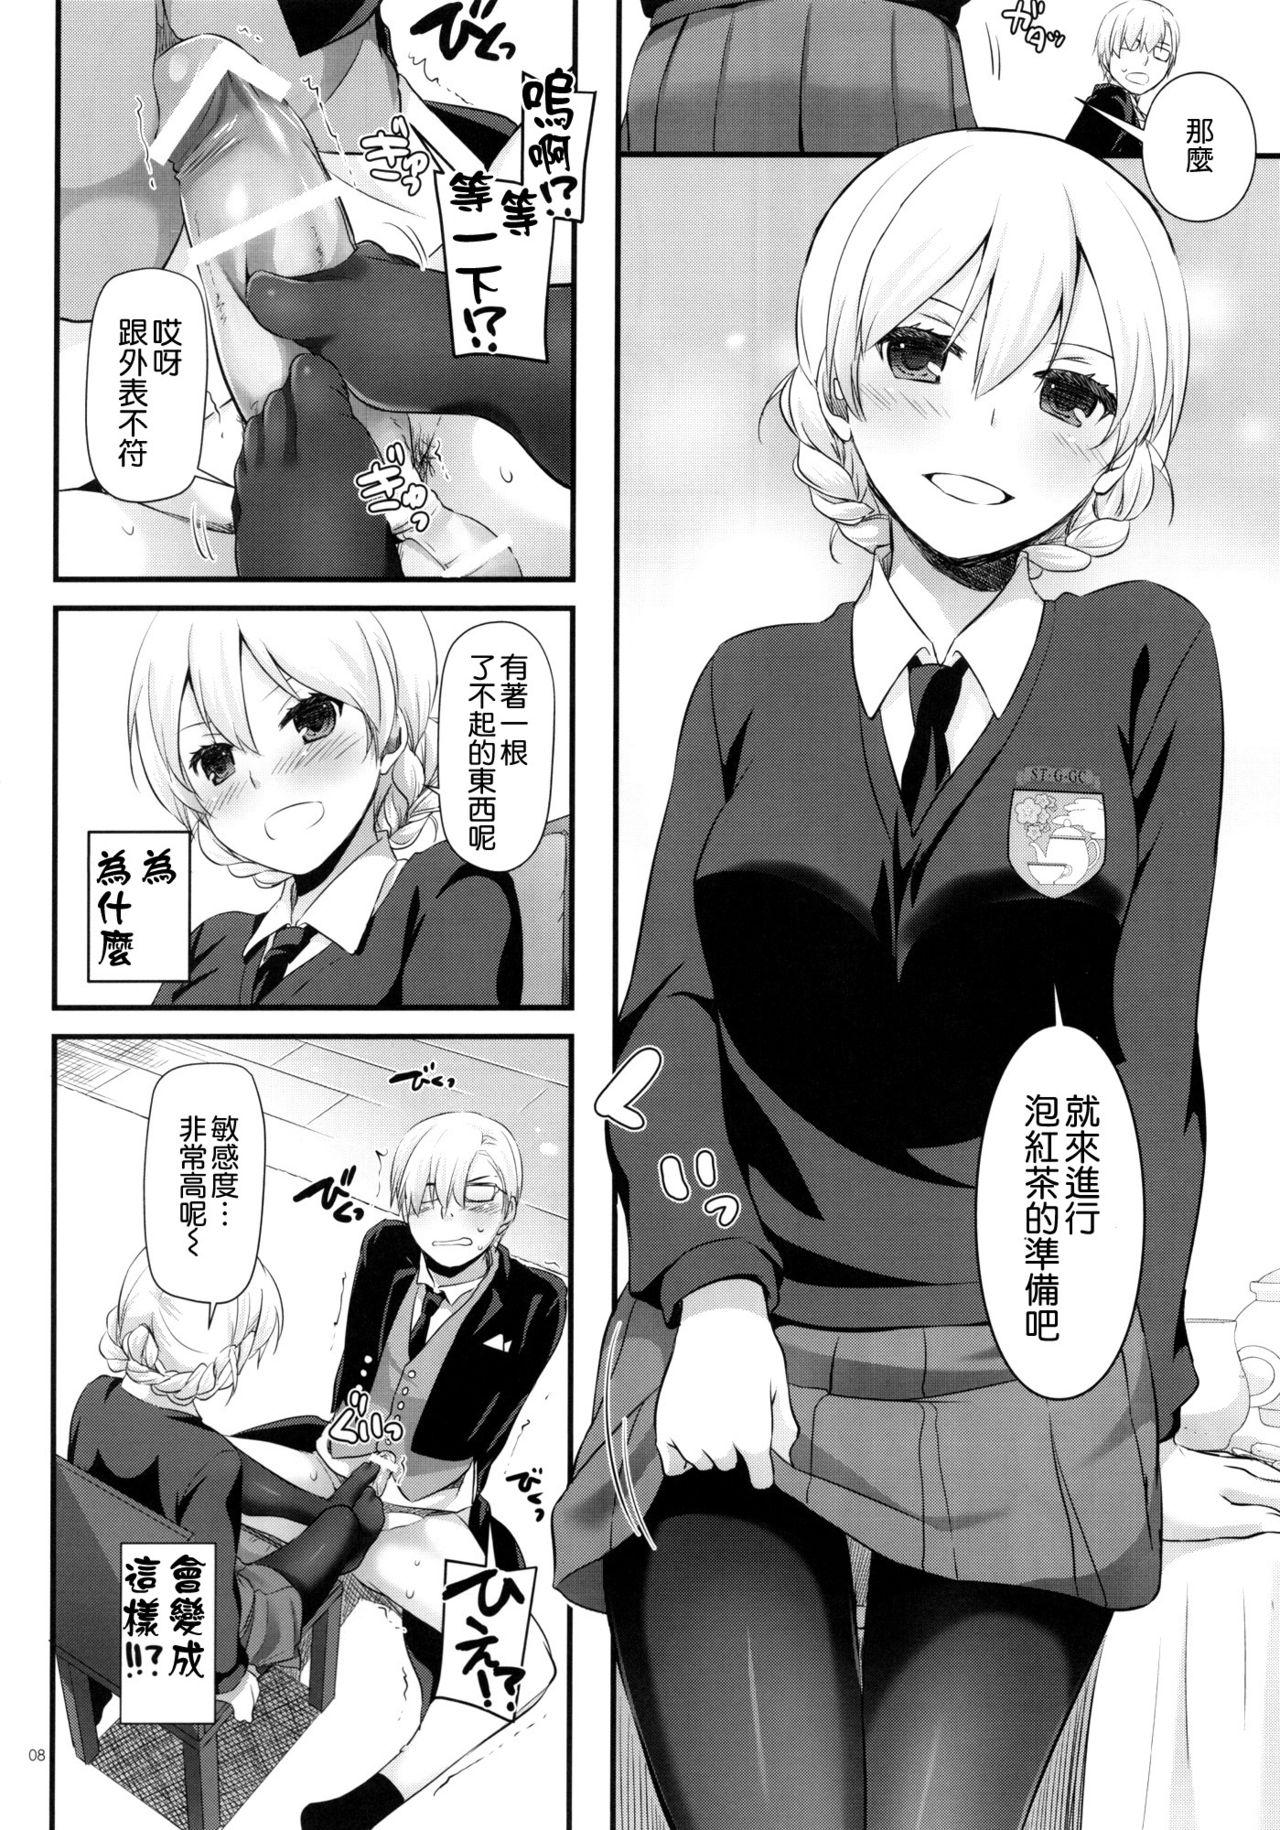 Pervs D.L. action 112 - Girls und panzer Piss - Page 8